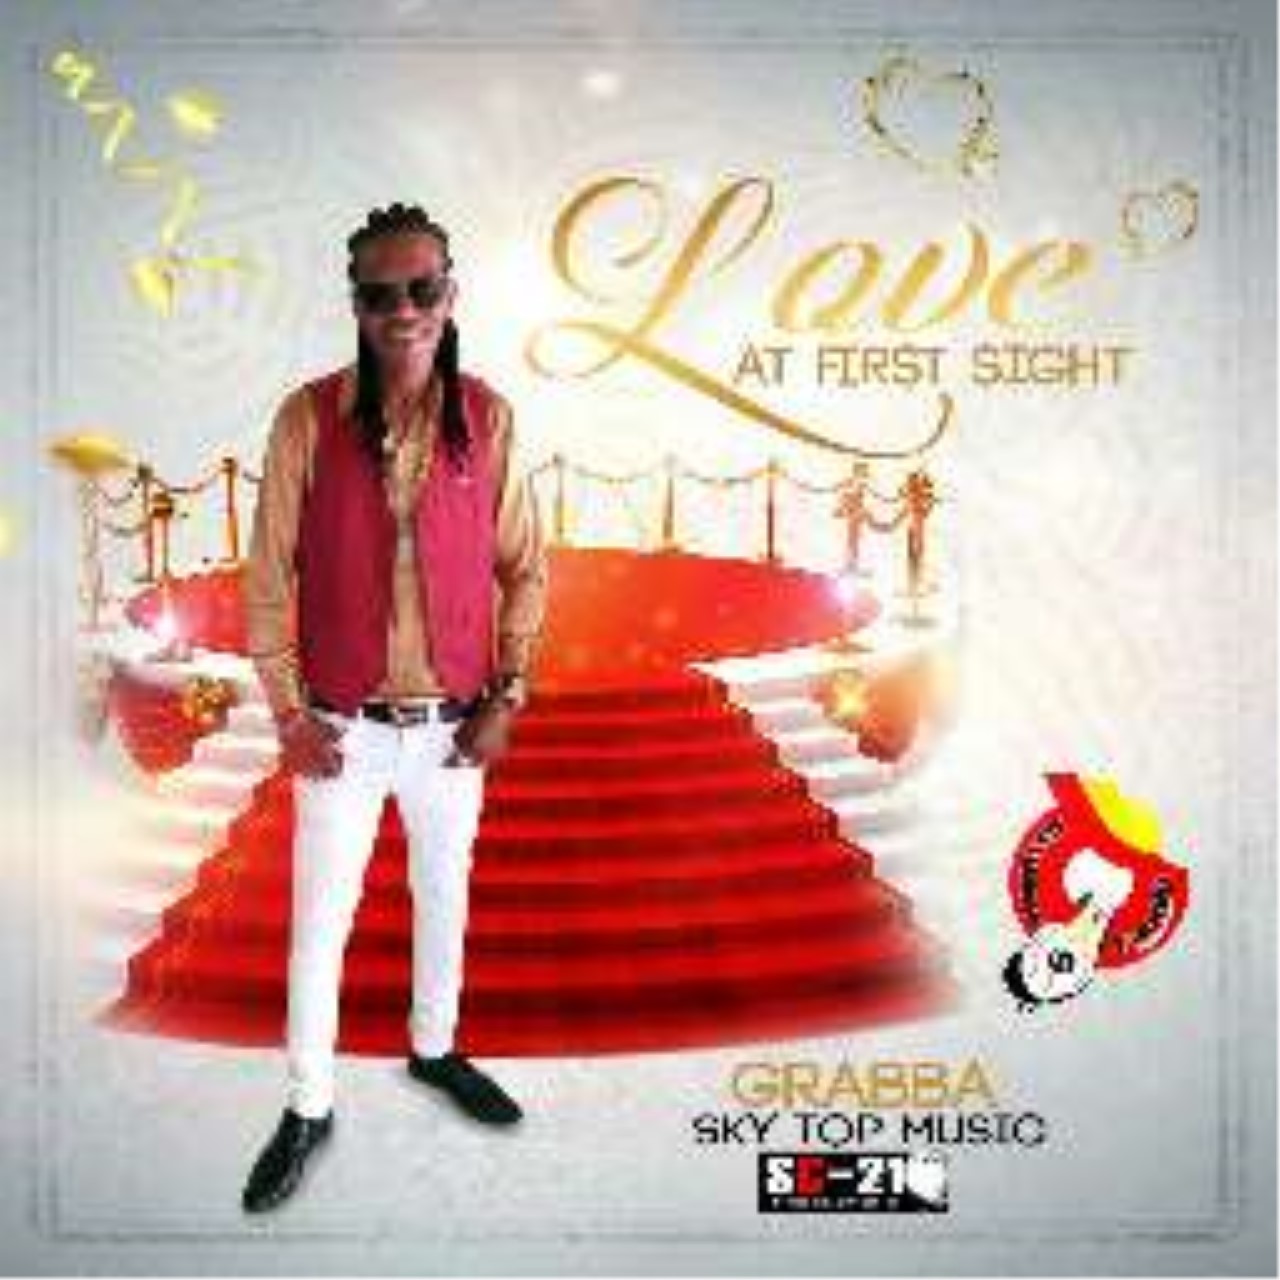 Art for GRABBA -LOVE AT FIRST SIGHT MI by GRABBA LOVE AT FIRST SIGHT